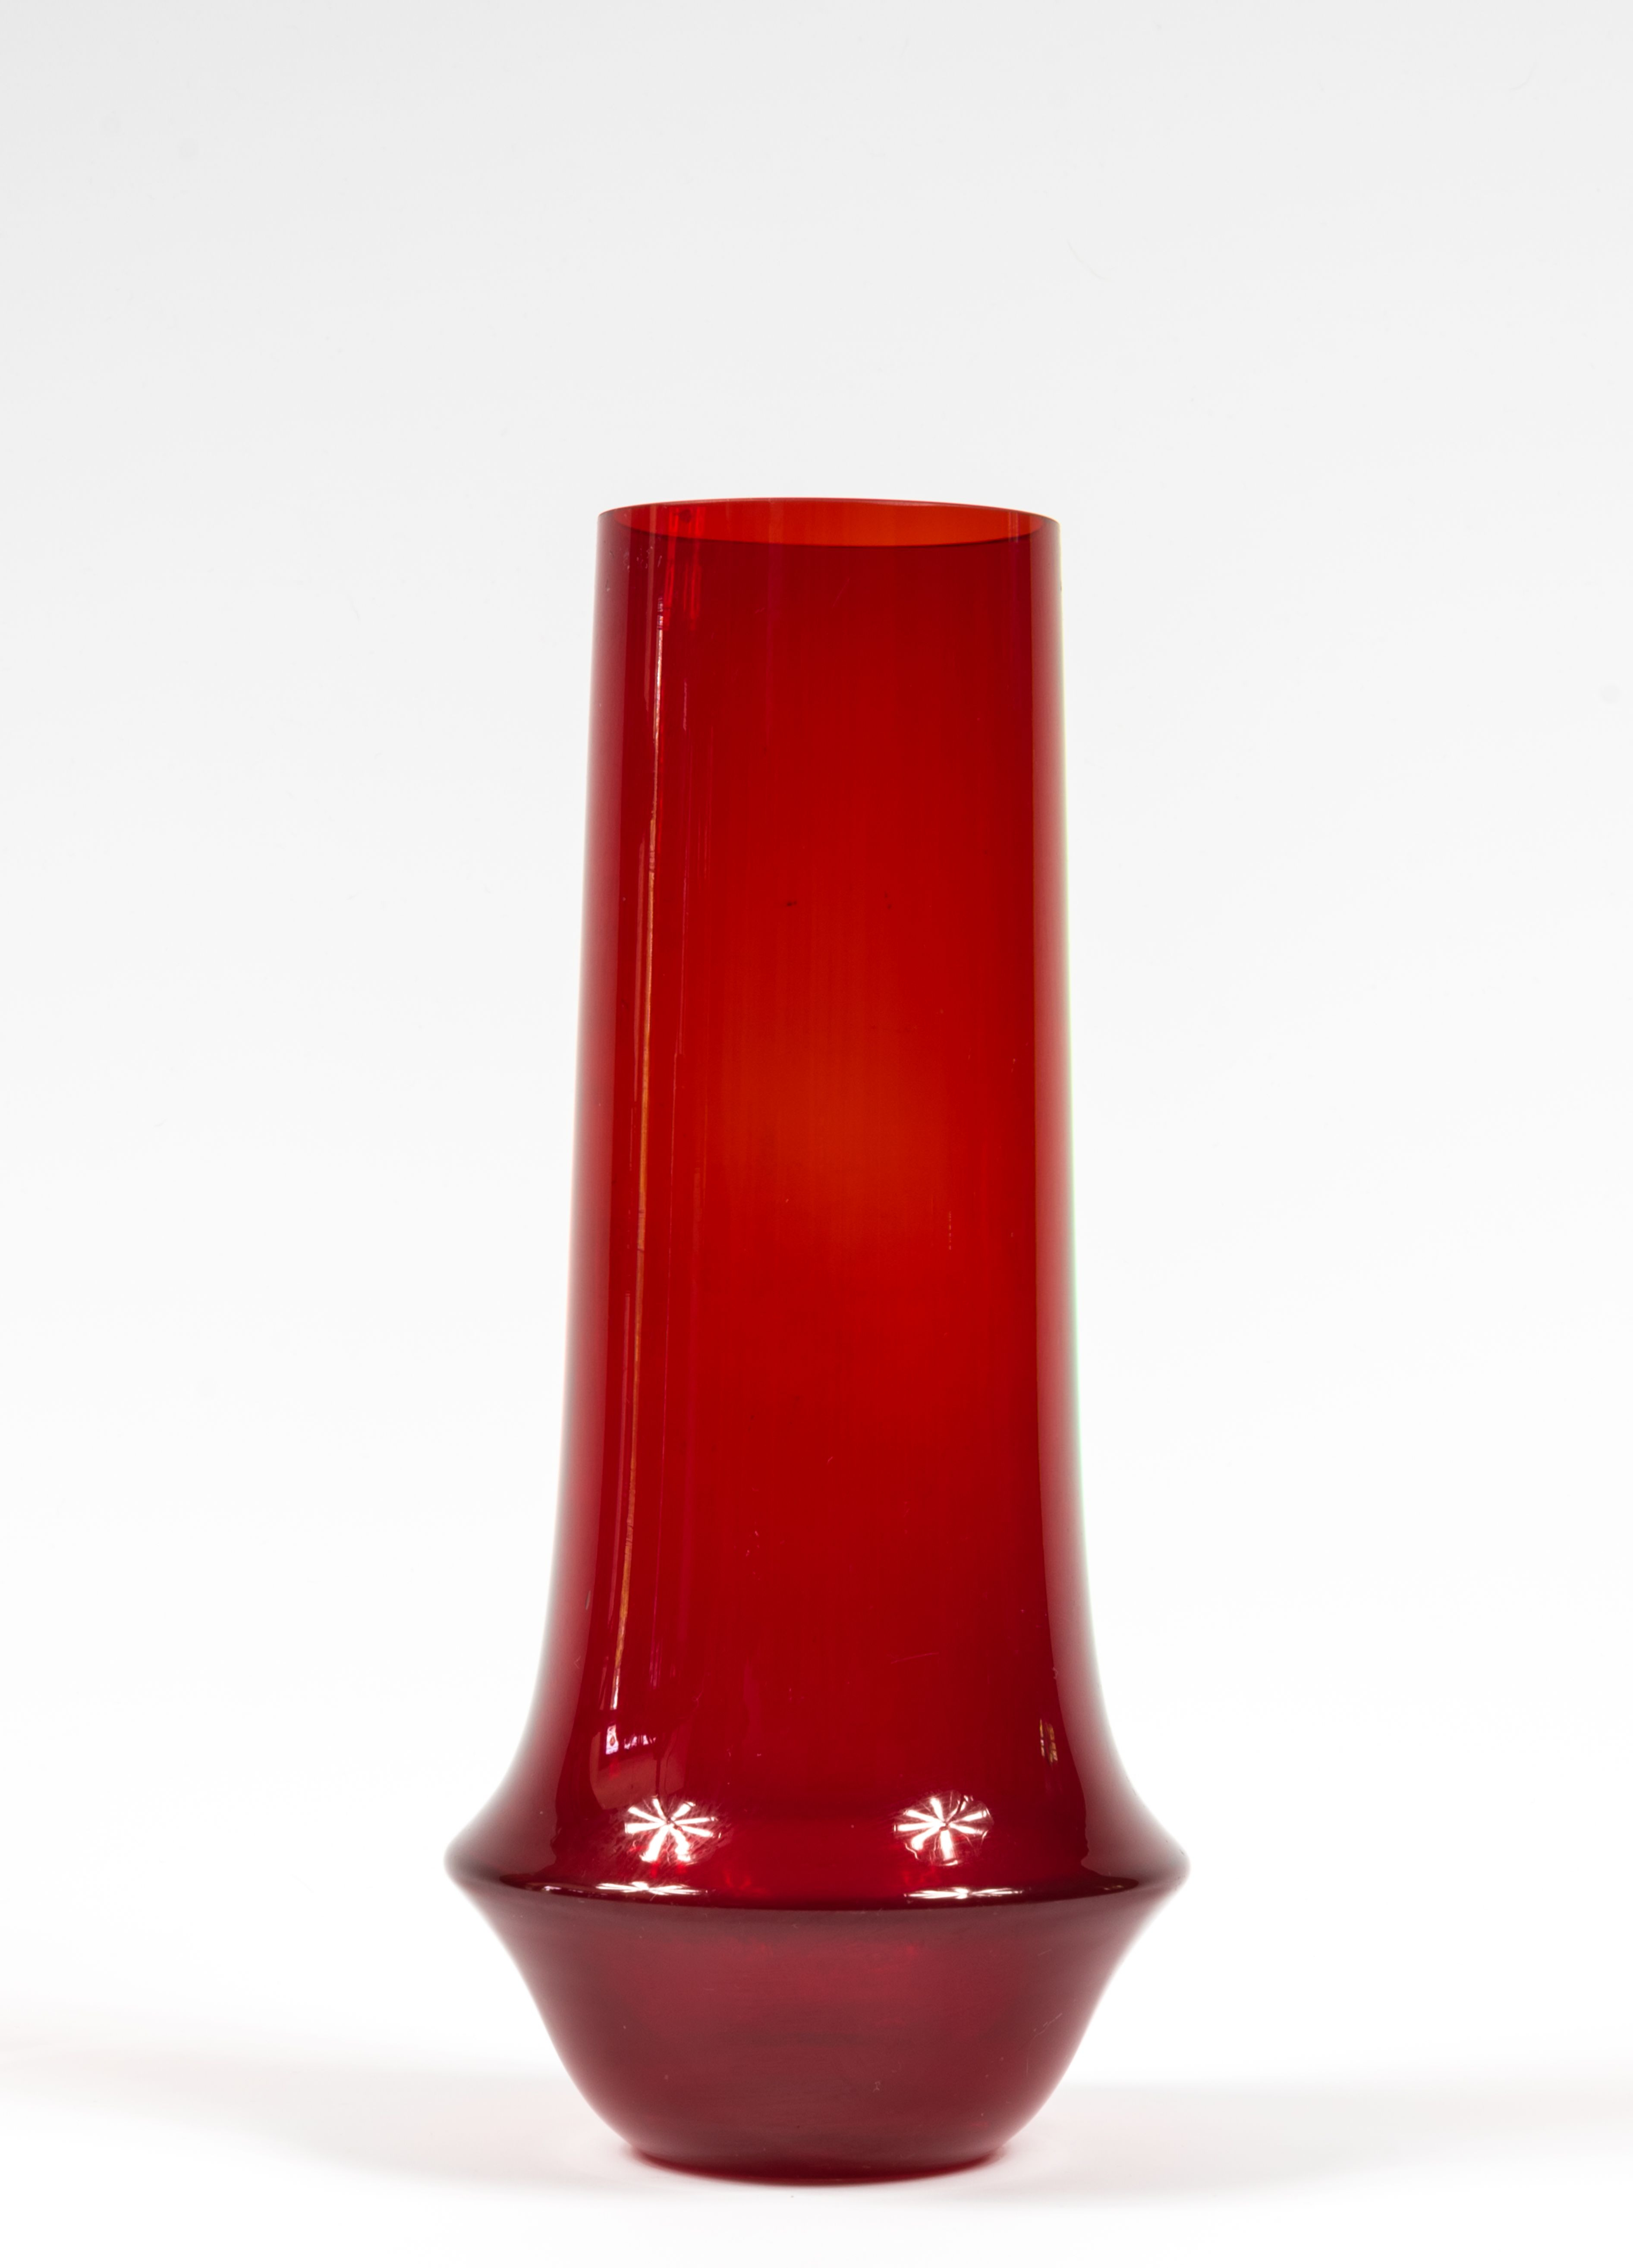 17 Awesome 24 Inch Tall Cylinder Vases 2024 free download 24 inch tall cylinder vases of riihimac2a4en lasi oy riihimaki red glass vase by tamara aladin intended for large scandinavian red glass vase designed by tamara aladin c1963 for riihimaki ri